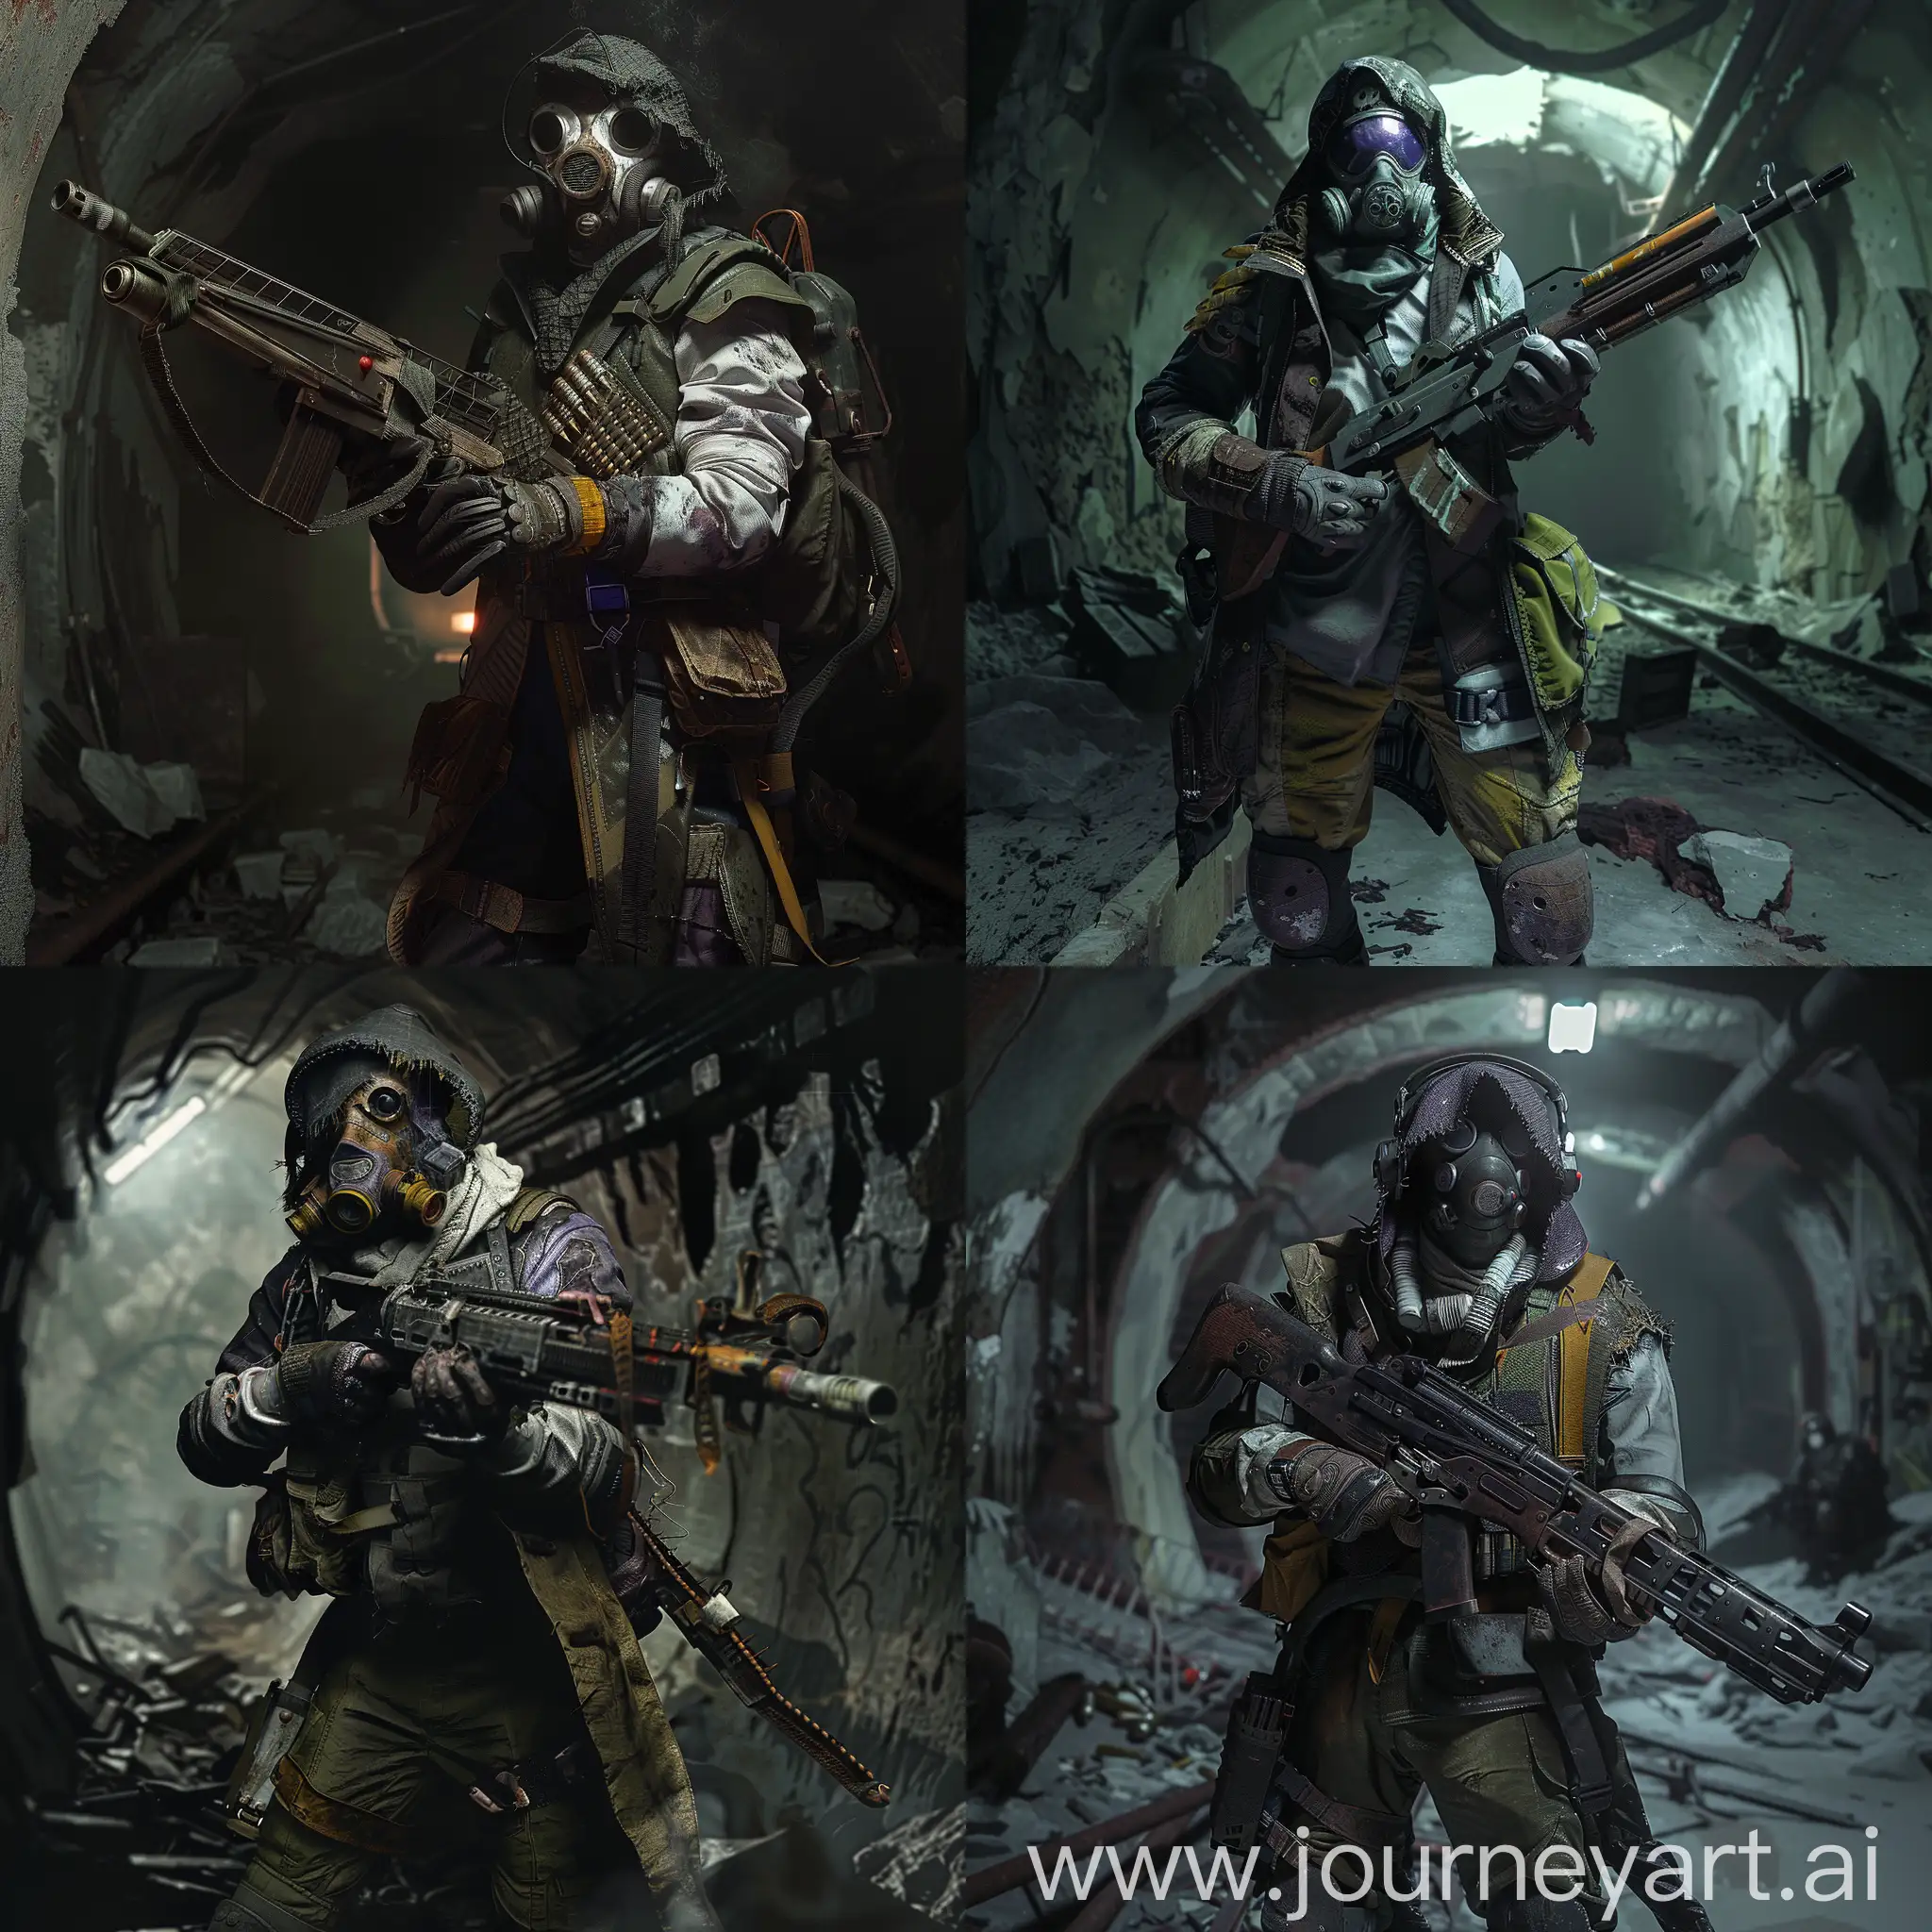 PostApocalyptic-Survivor-in-Abandoned-Catacombs-with-Soviet-Sniper-Rifle